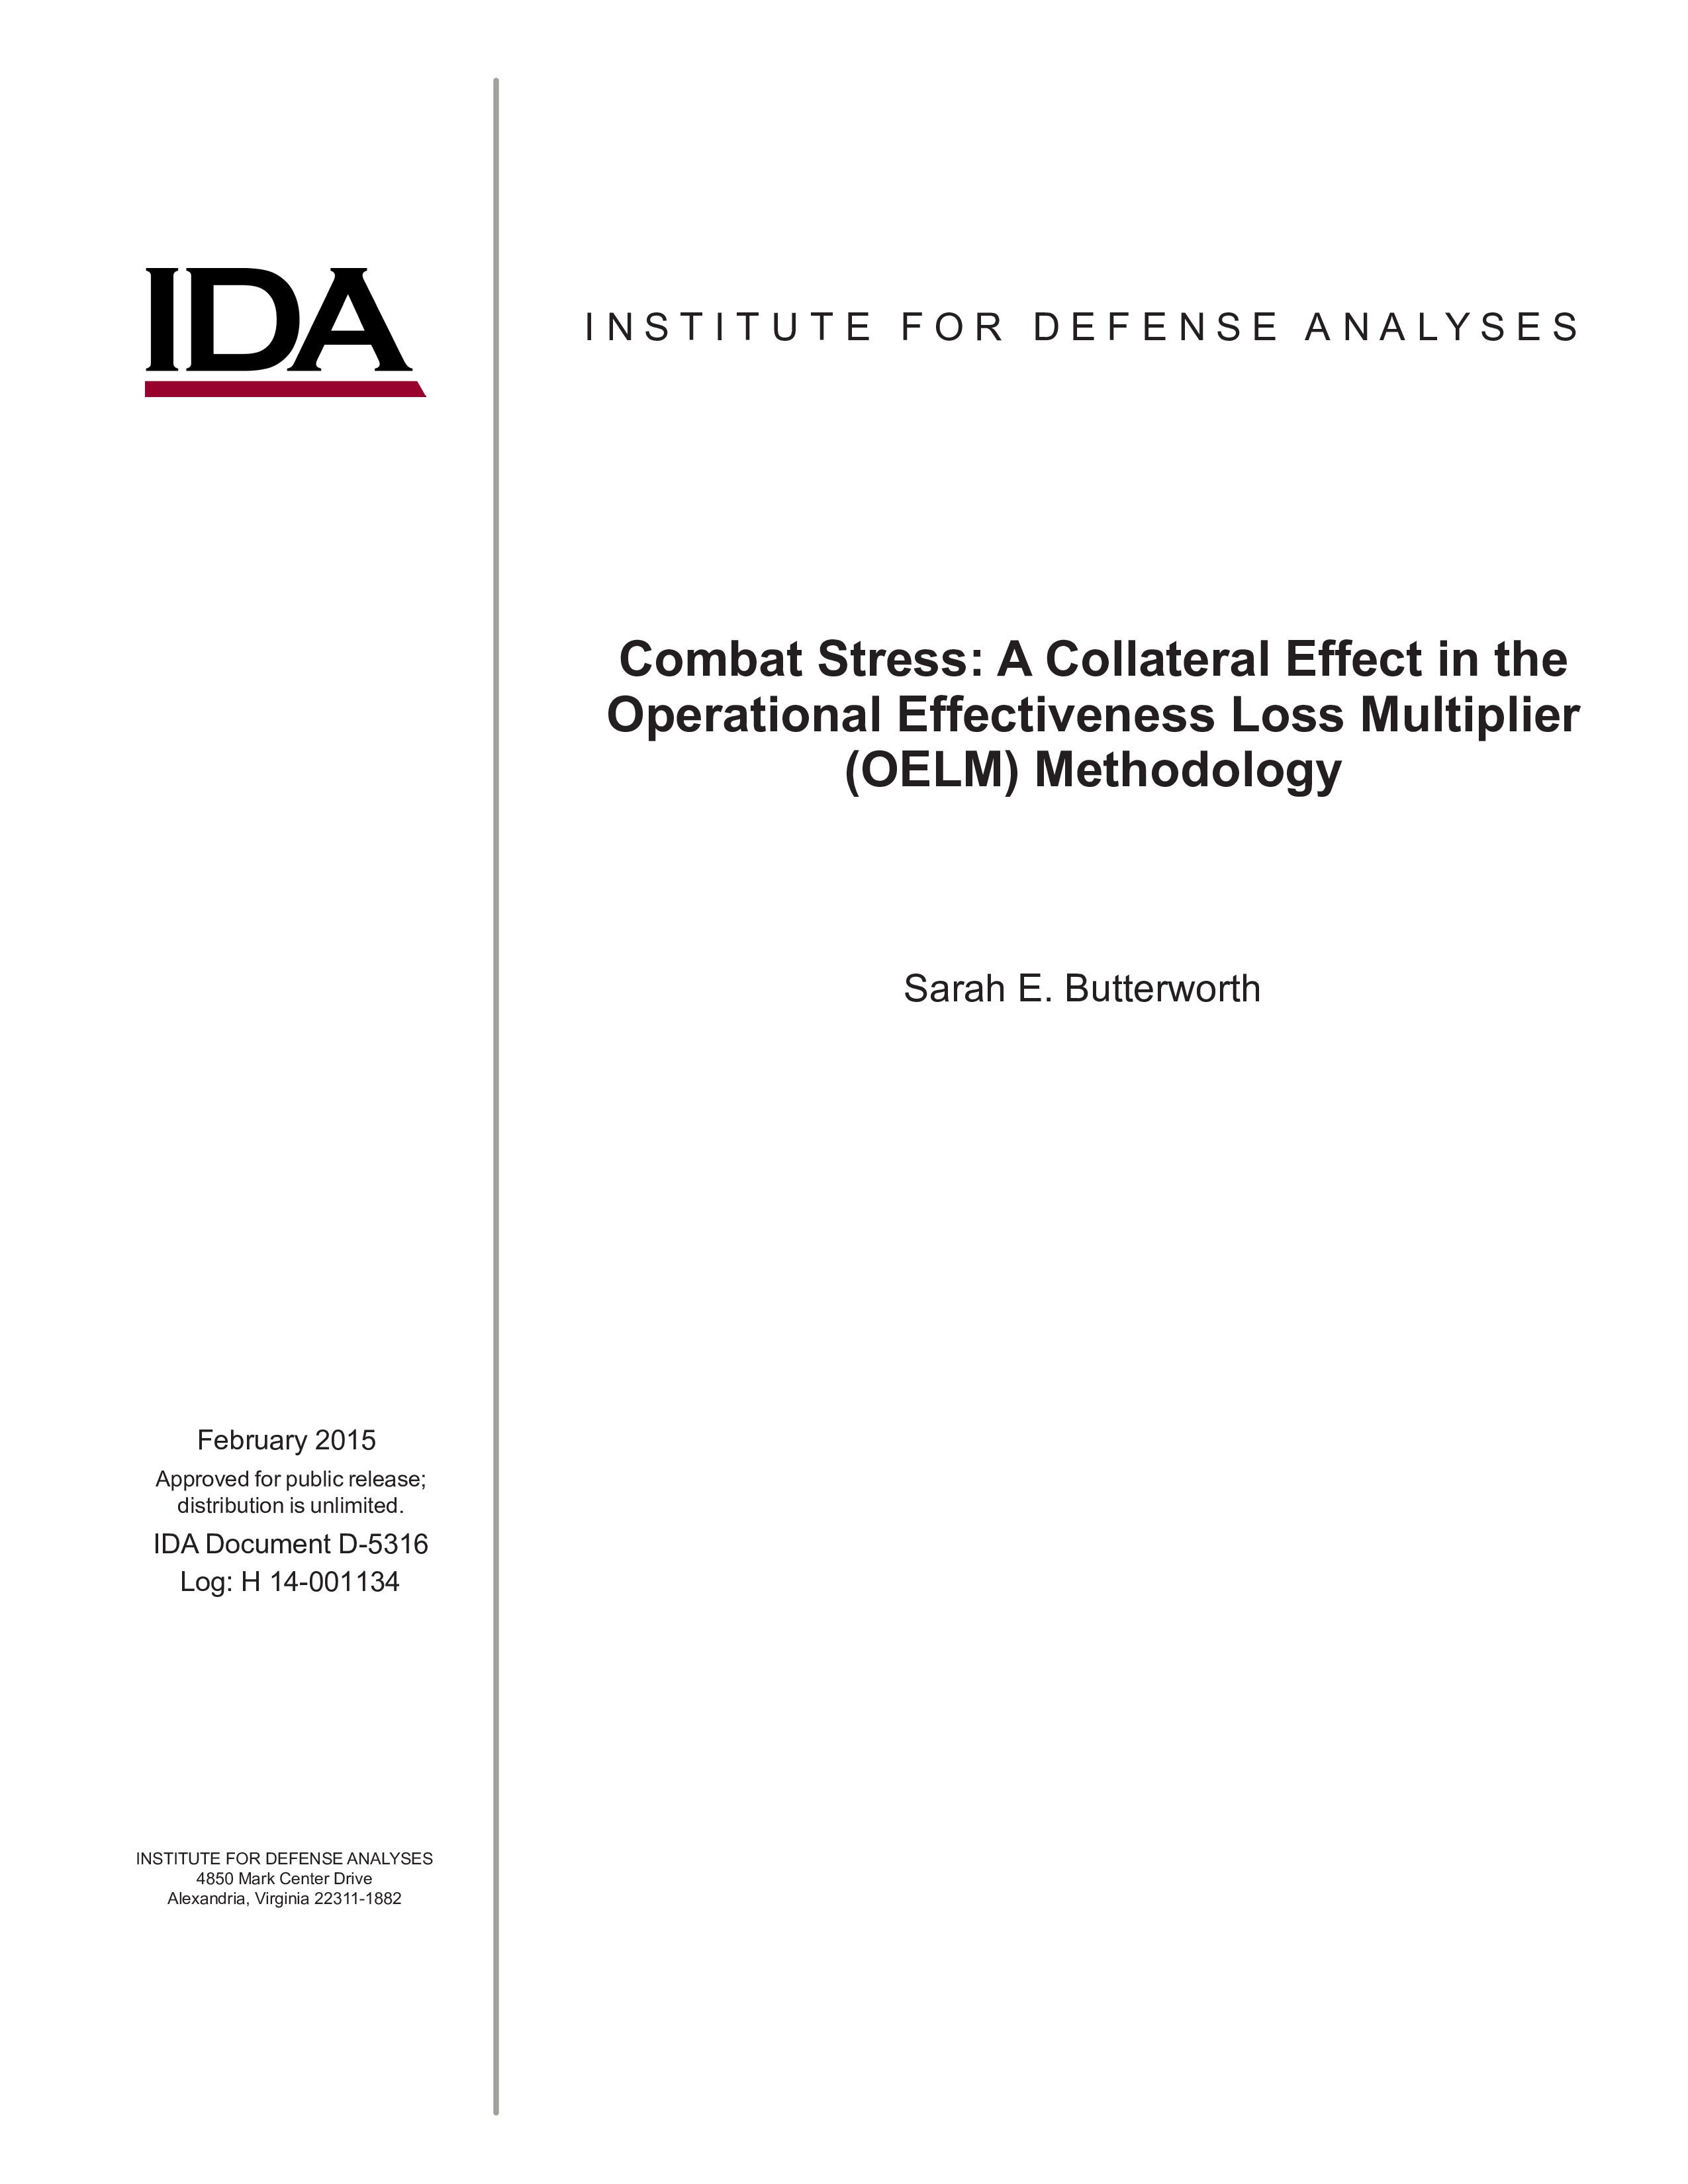 Combat Stress: A Collateral Effect in the Operational Effectiveness Loss Multiplier (OELM) Methodology